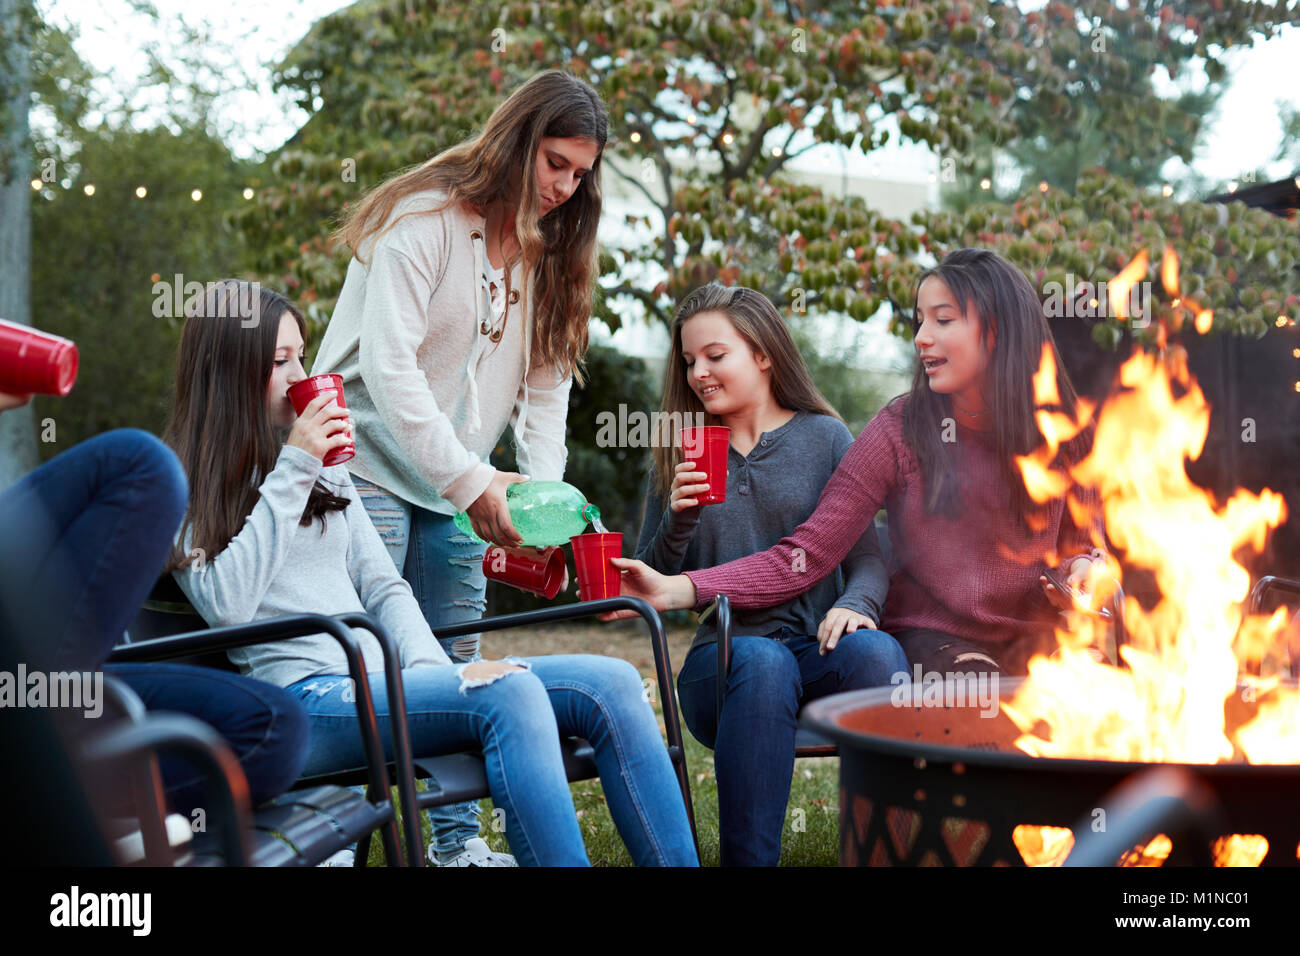 Teenager pours drinks for girlfriends sitting round firepit Stock Photo